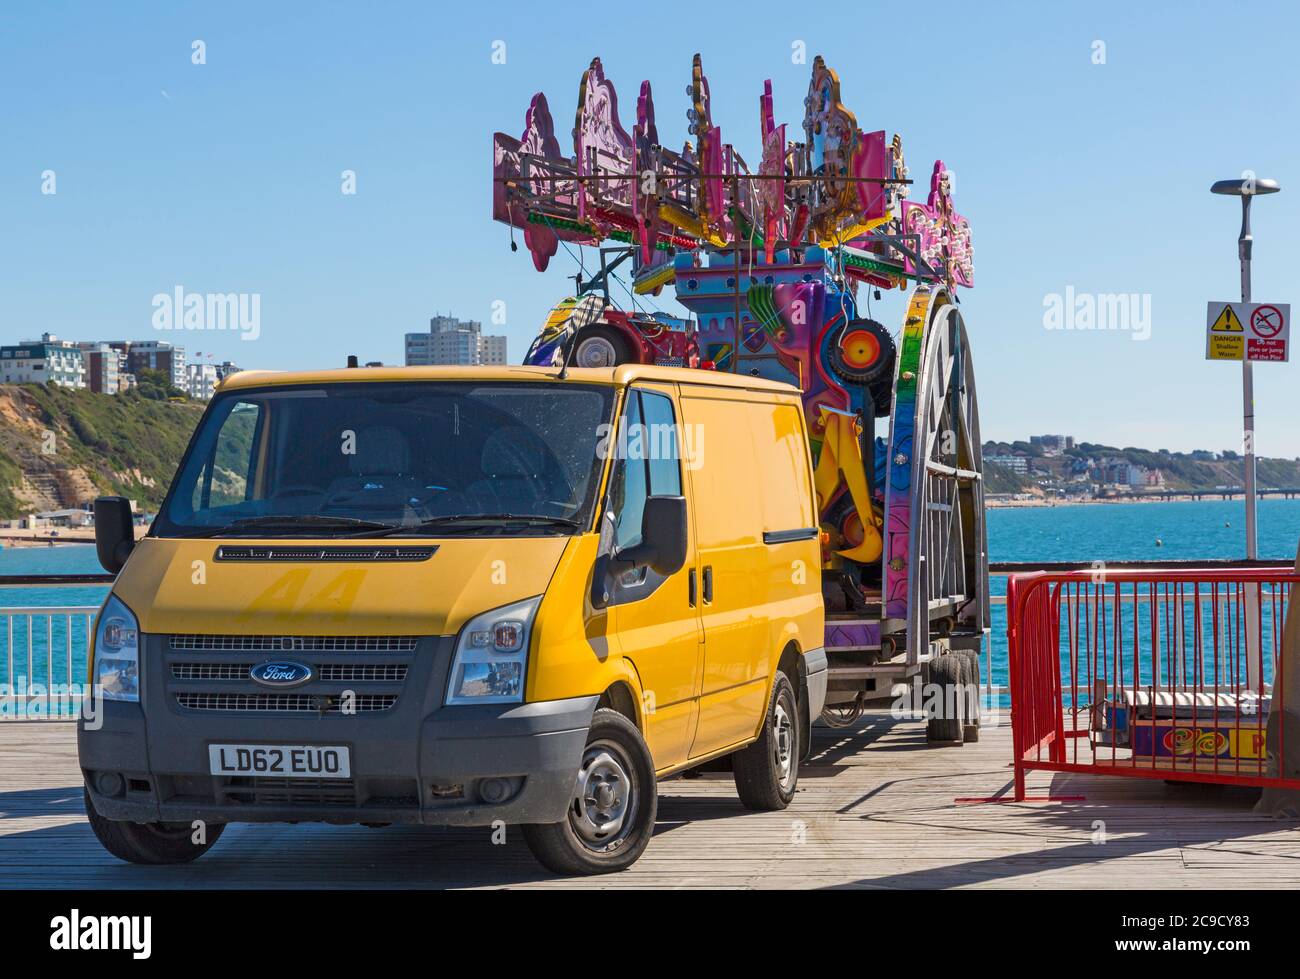 Fairground ride on Bournemouth Pier waiting to be assembled at Bournemouth, Dorset UK in July Stock Photo